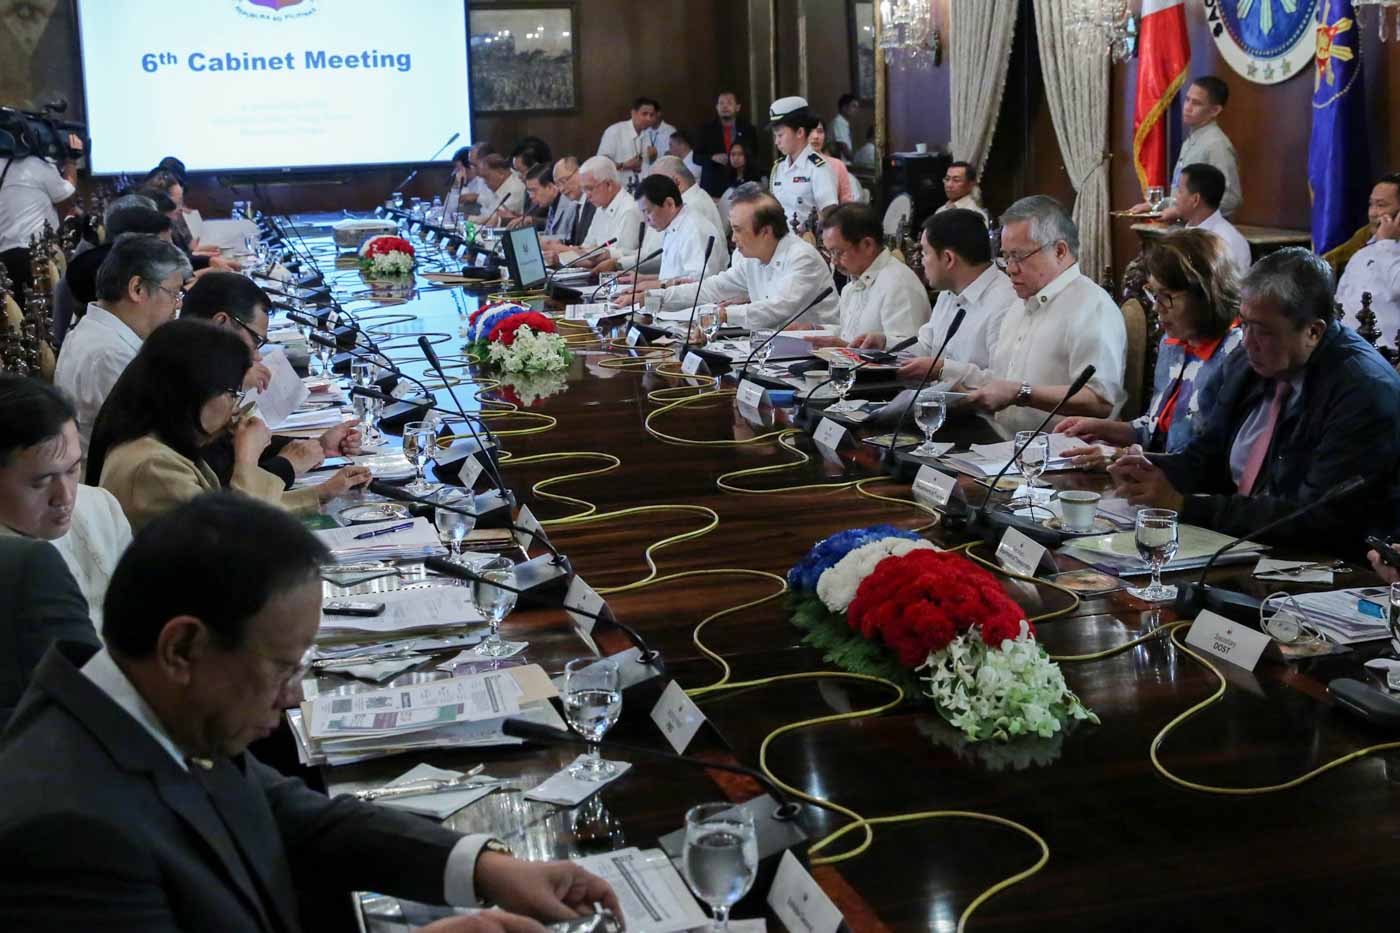 CABINET MEETING. President Rodrigo Duterte presides over the 6th Cabinet meeting at the Malacañang State Dining Room on September 14, 2016. Photo by Albert Alcain/PPD 